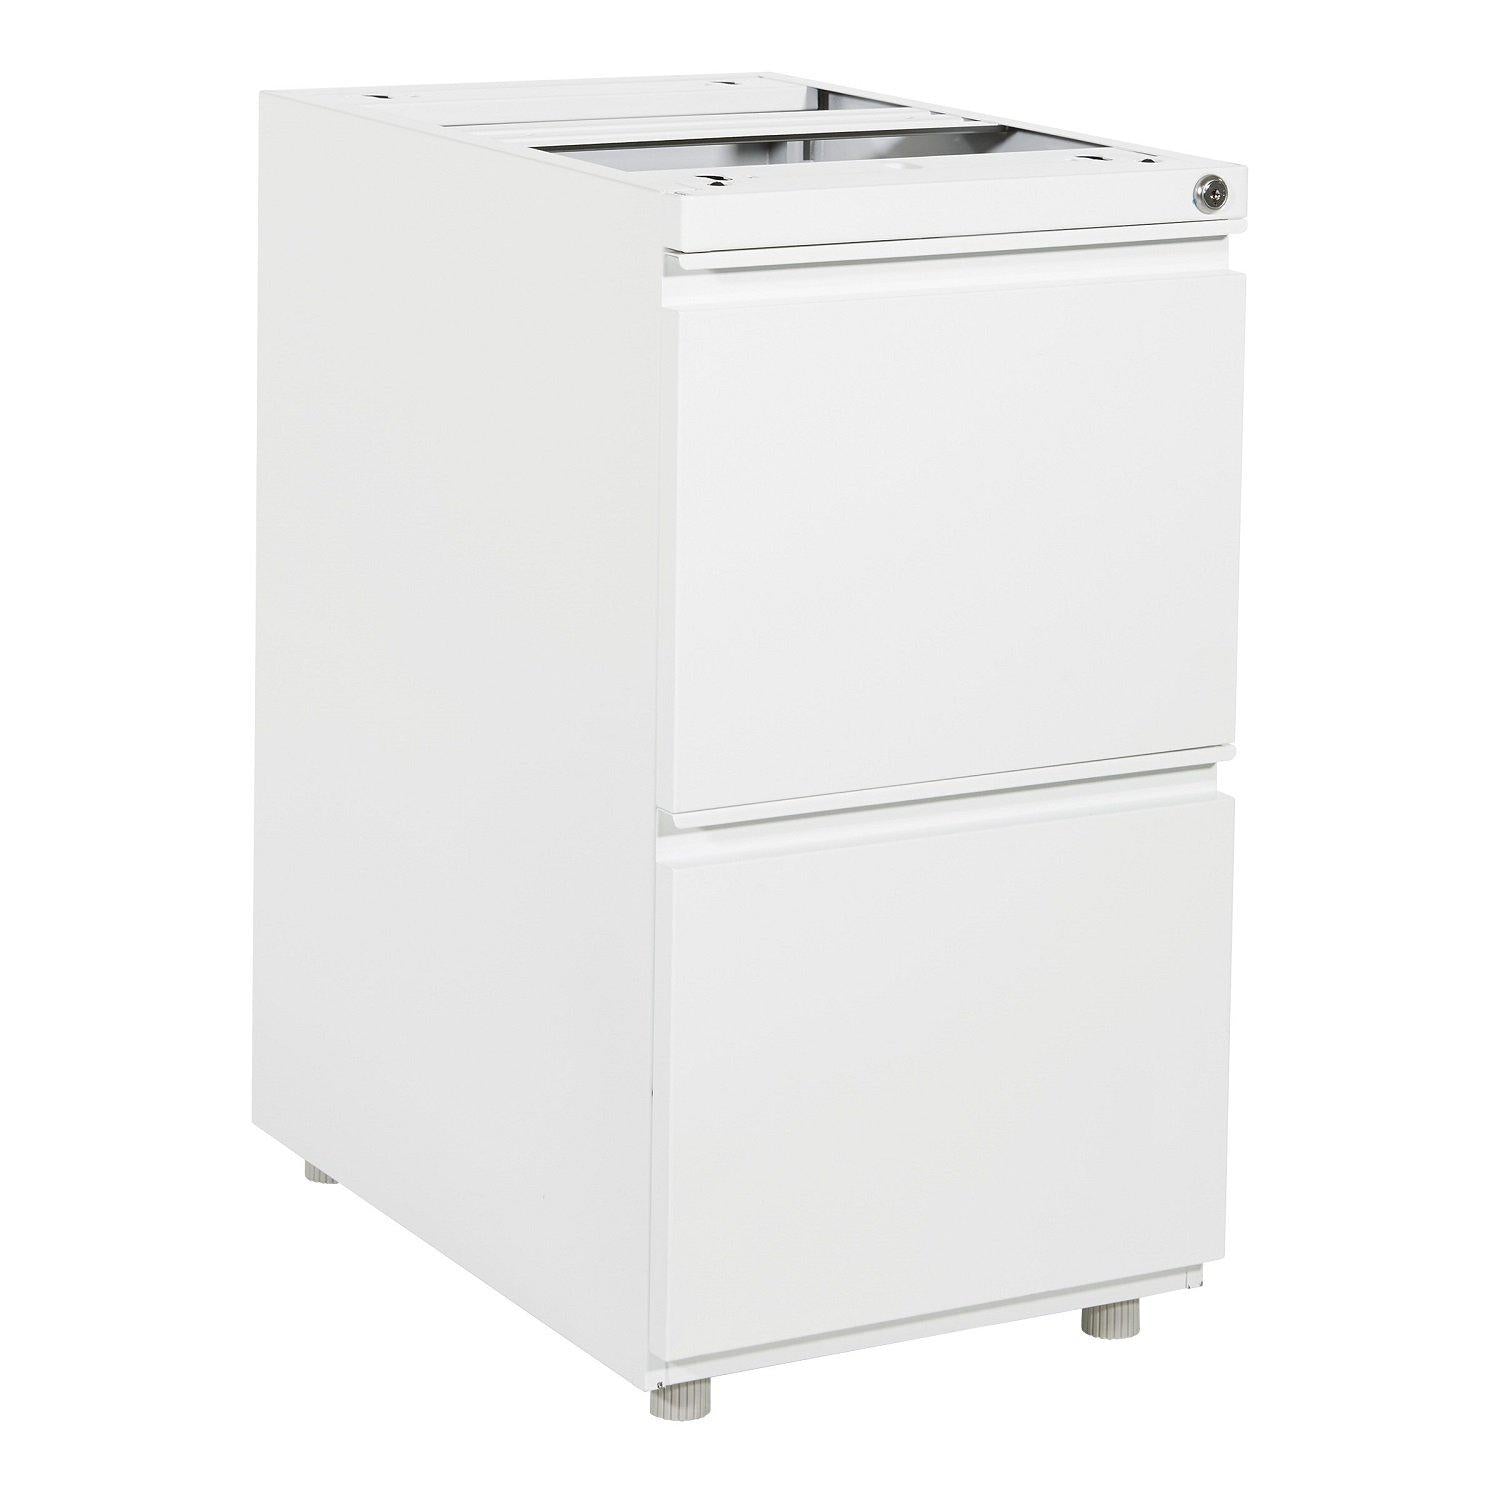 Heavy Duty 22" Open Top Pedestal With 2 File Drawers